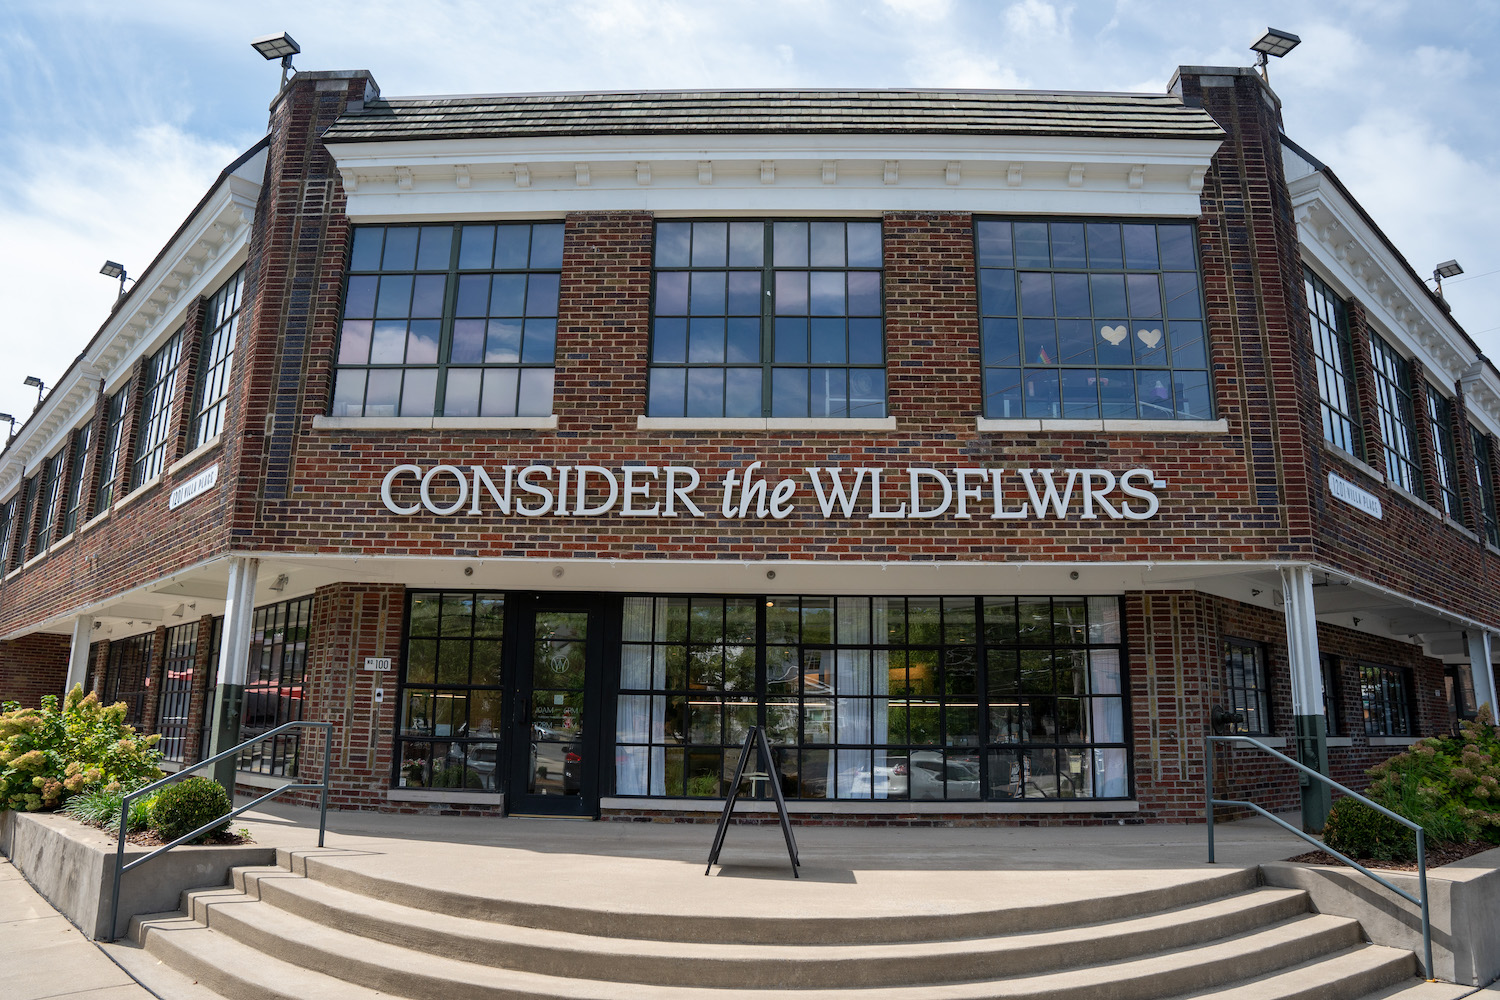 Consider the Wldflwrs exterior